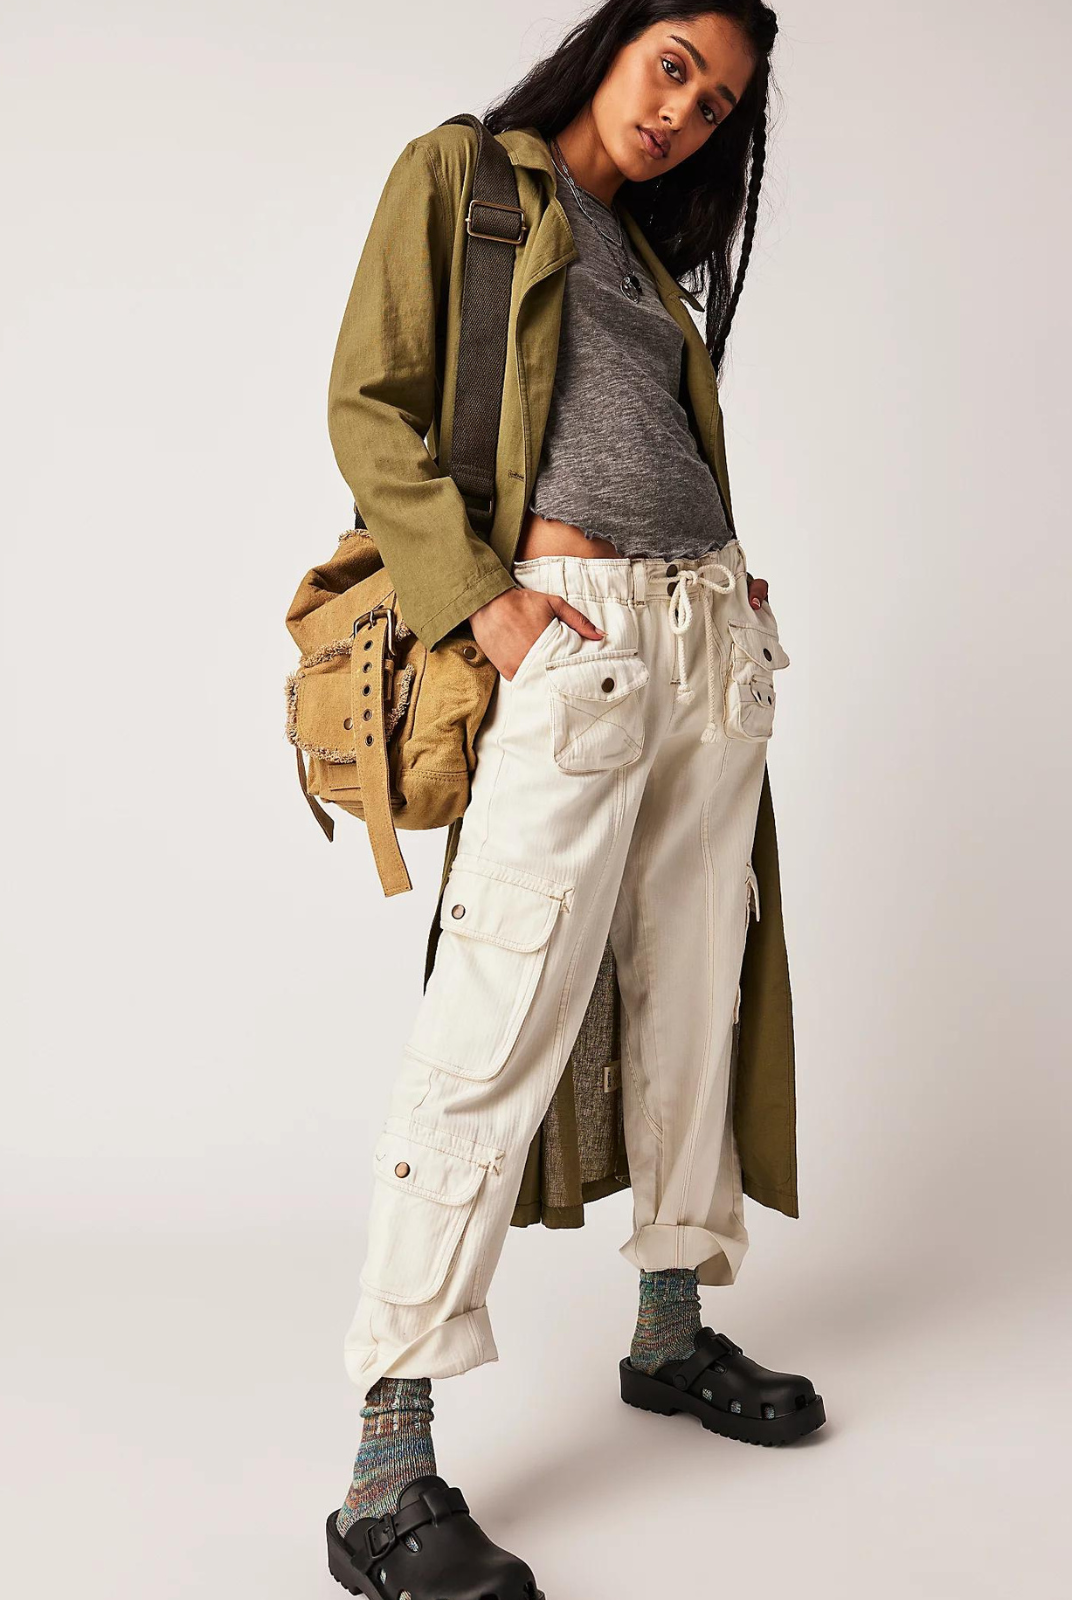 Free People Tahiti Cargo Pant- Tofu. The coolest way to cargo, these timeless pants are featured in a low-rise, slouchy straight silhouette with utility-style pockets throughout and smocked waist for ease.